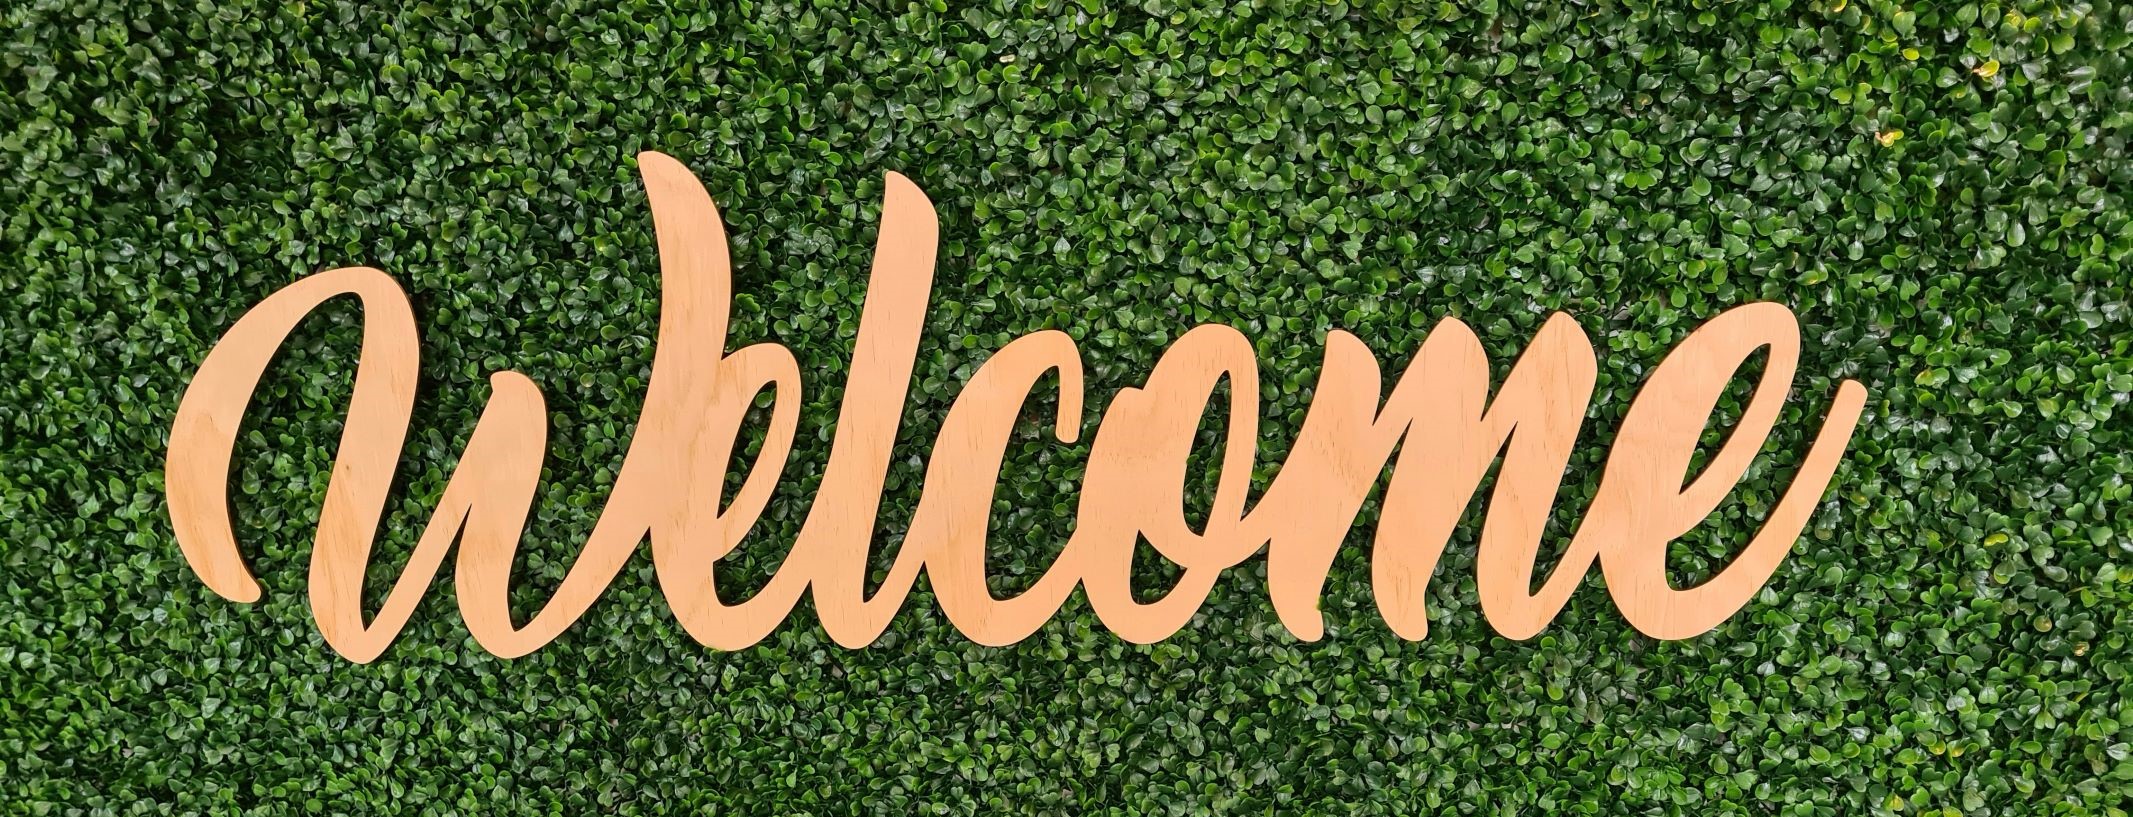 Welcome written with a greenery backdrop